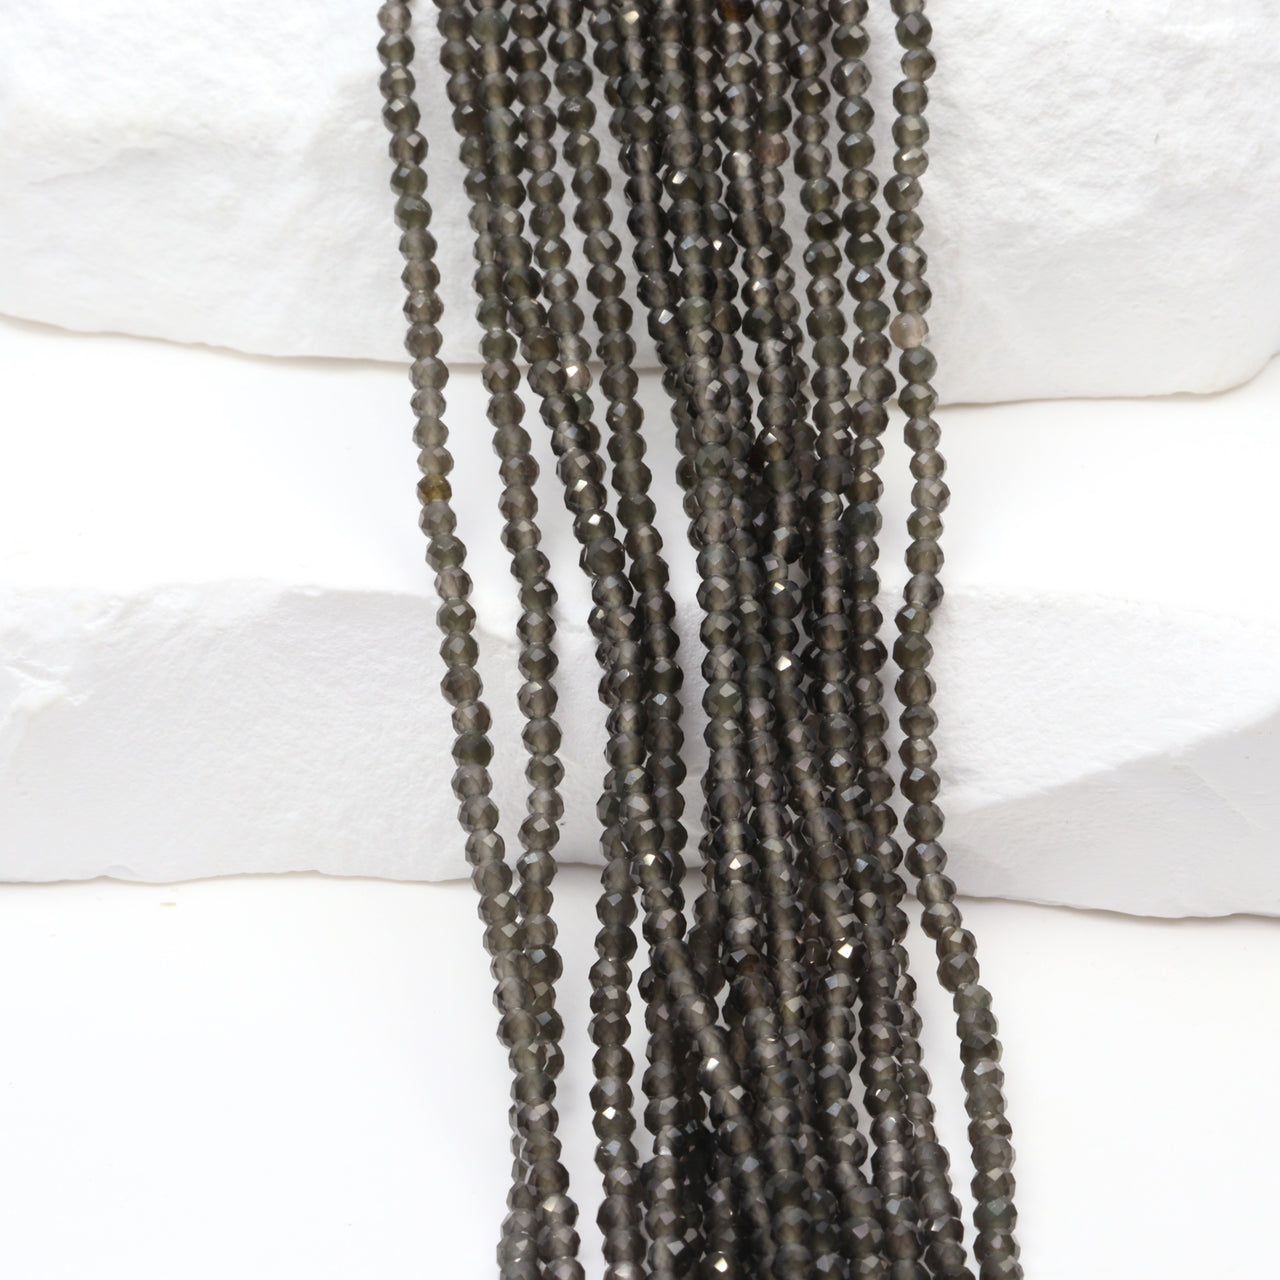 Black Obsidian 2mm Faceted Rounds